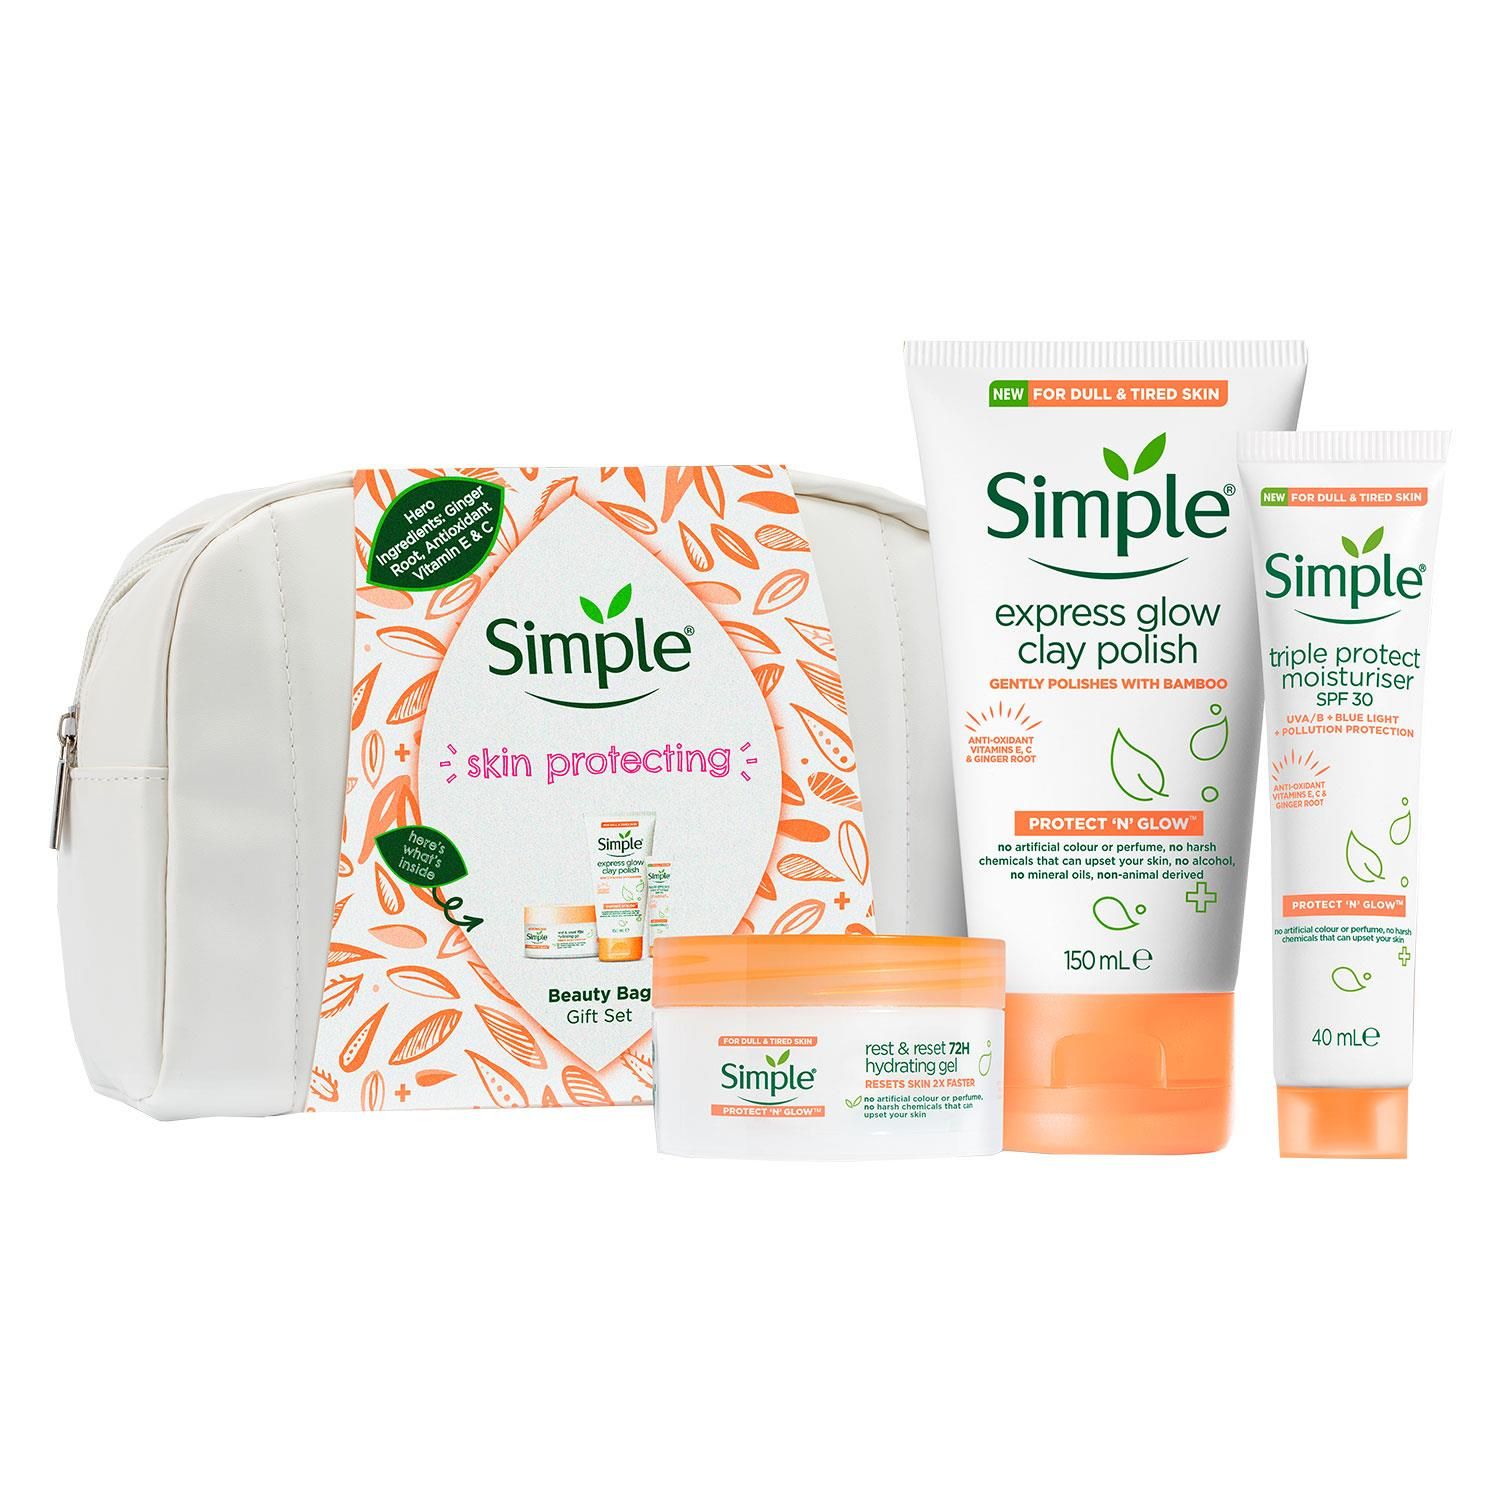 Know someone who is totally and utterly into taking care of their skin in the kindest way possible  The Simple Skin Protecting Beauty Bag Gift Set will make their entire day. Right from the get-go, the Simple philosophy has always been about being kind to skin, even the most sensitive. Because all skin can be sensitive at times. That's why this set of Christmas gifts comes with an abundance of Simple products that are kind to their skin. 

Featuring Protect 'N' Glow Rest and Reset 72h Hydrating Gel. Yasss! Supercharged with ingredients that help brighten dull complexions, this overnight gel is your shortcut to get the glow you've always dreamed of. Simple Protect 'N' Glow Triple Protect Moisturiser SPF 30 is your all-in-one secret weapon - think sun-protected, naturally glowing skin, without that greasy feeling. 

Features:
With brightening antioxidants, vitamins C & E, and organic Ginger Root Extract, this gel-textured night cream boosts your skin's natural renewal process, for glowing skin by morning
Our vegan Rest and Reset 72h Hydrating Gel is free from artificial colour, perfume and mineral oil and contains no harsh chemicals
Simple Protect 'N' Glow Triple Protect Moisturiser SPF 30 is super lightweight and doesn't leave residue on the skin. Amazing!
With brightening anti-oxidants such as vitamins C & E and organic ginger root extract as well as prebiotics, this moisturiser with SPF protects and hydrates your skin throughout the day

Safety Warnings: For external use only. Avoid getting into your eyes. For external use only. Avoid getting into your eyes. 

Each Gift Set Includes:
1x Simple Rest and Reset 72h Hydrating Gel, 50 ml
1x Simple Triple Protect Moisturiser SPF 30, 40 ml
1x Simple Express Glow Clay Polish Cleanser 150 ml